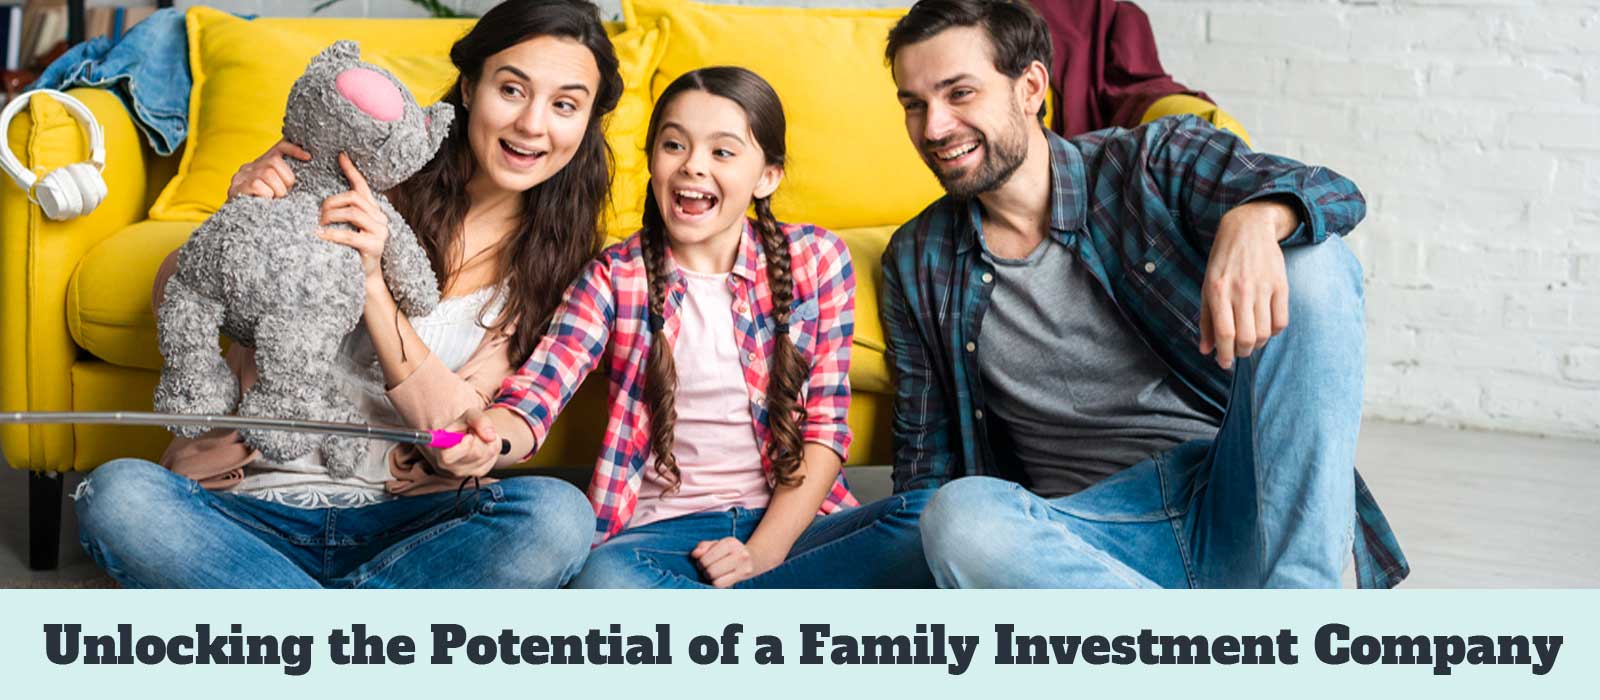 Unlocking the Potential of a Family Investment Company